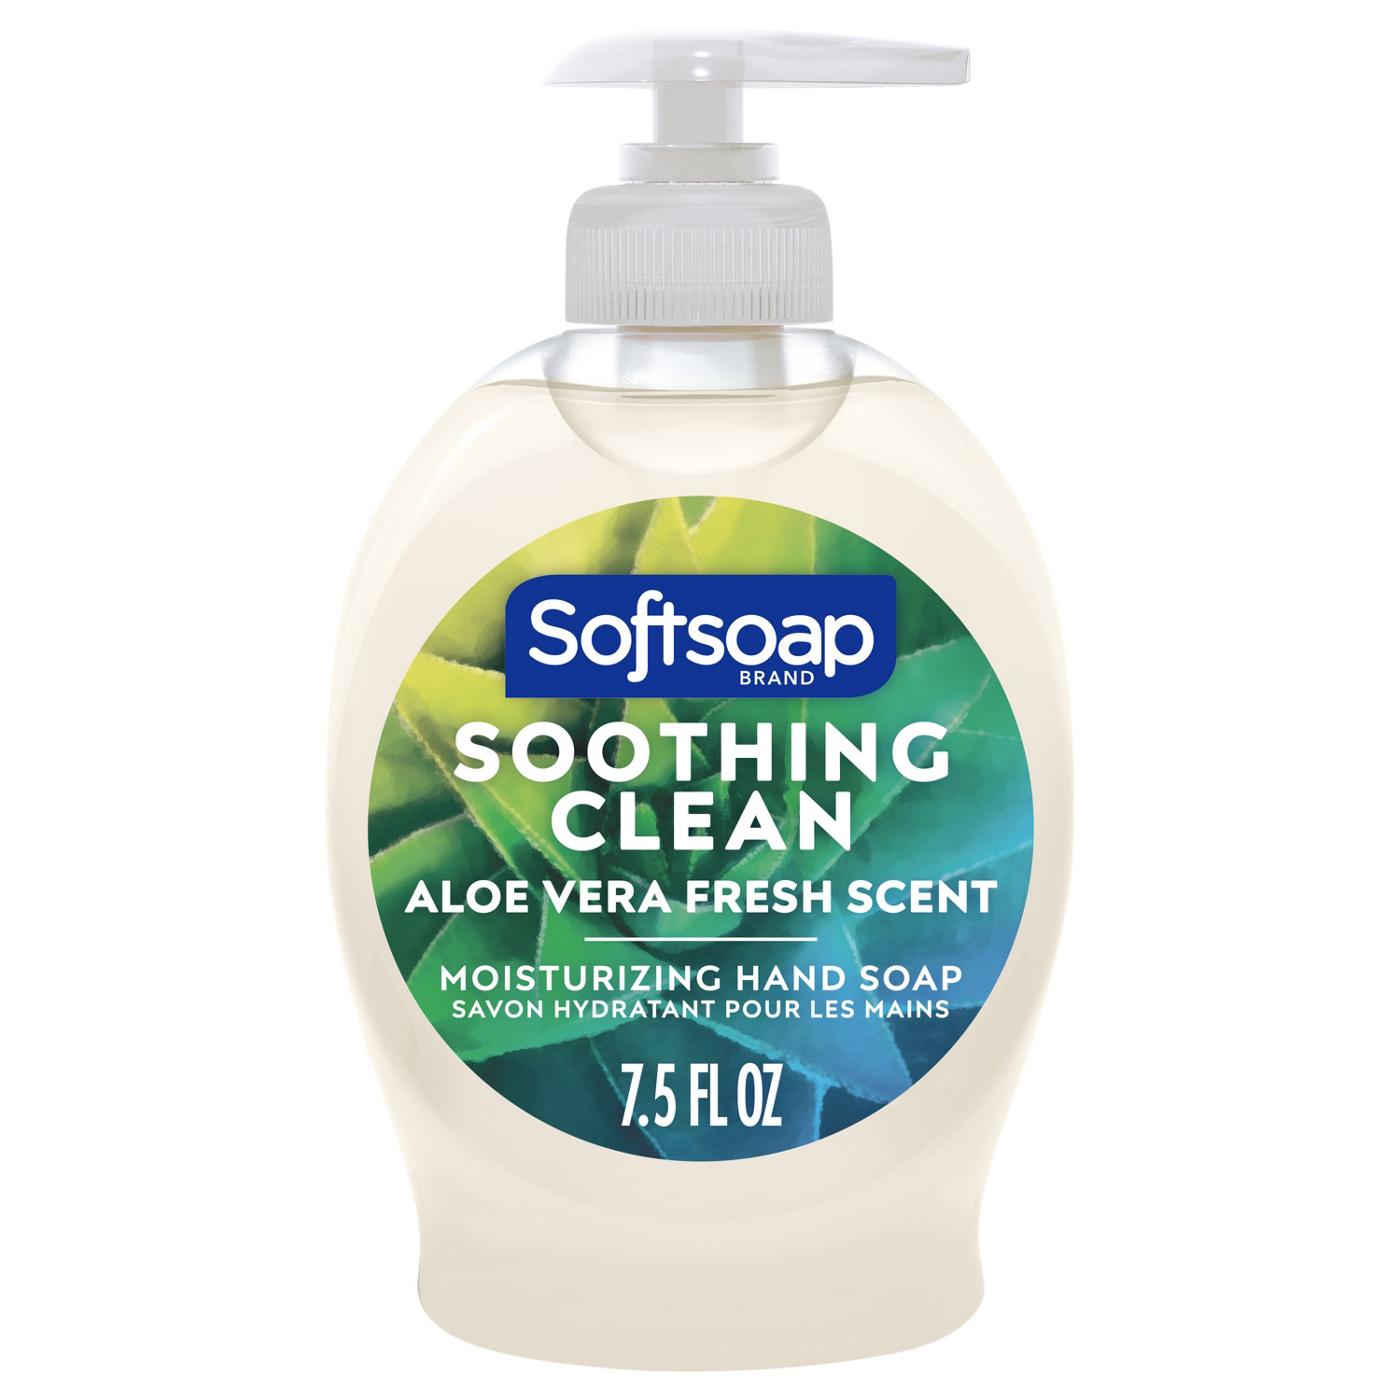 Softsoap Soothing Clean Moisturizing Hand Soap - Aloe Vera; image 1 of 4